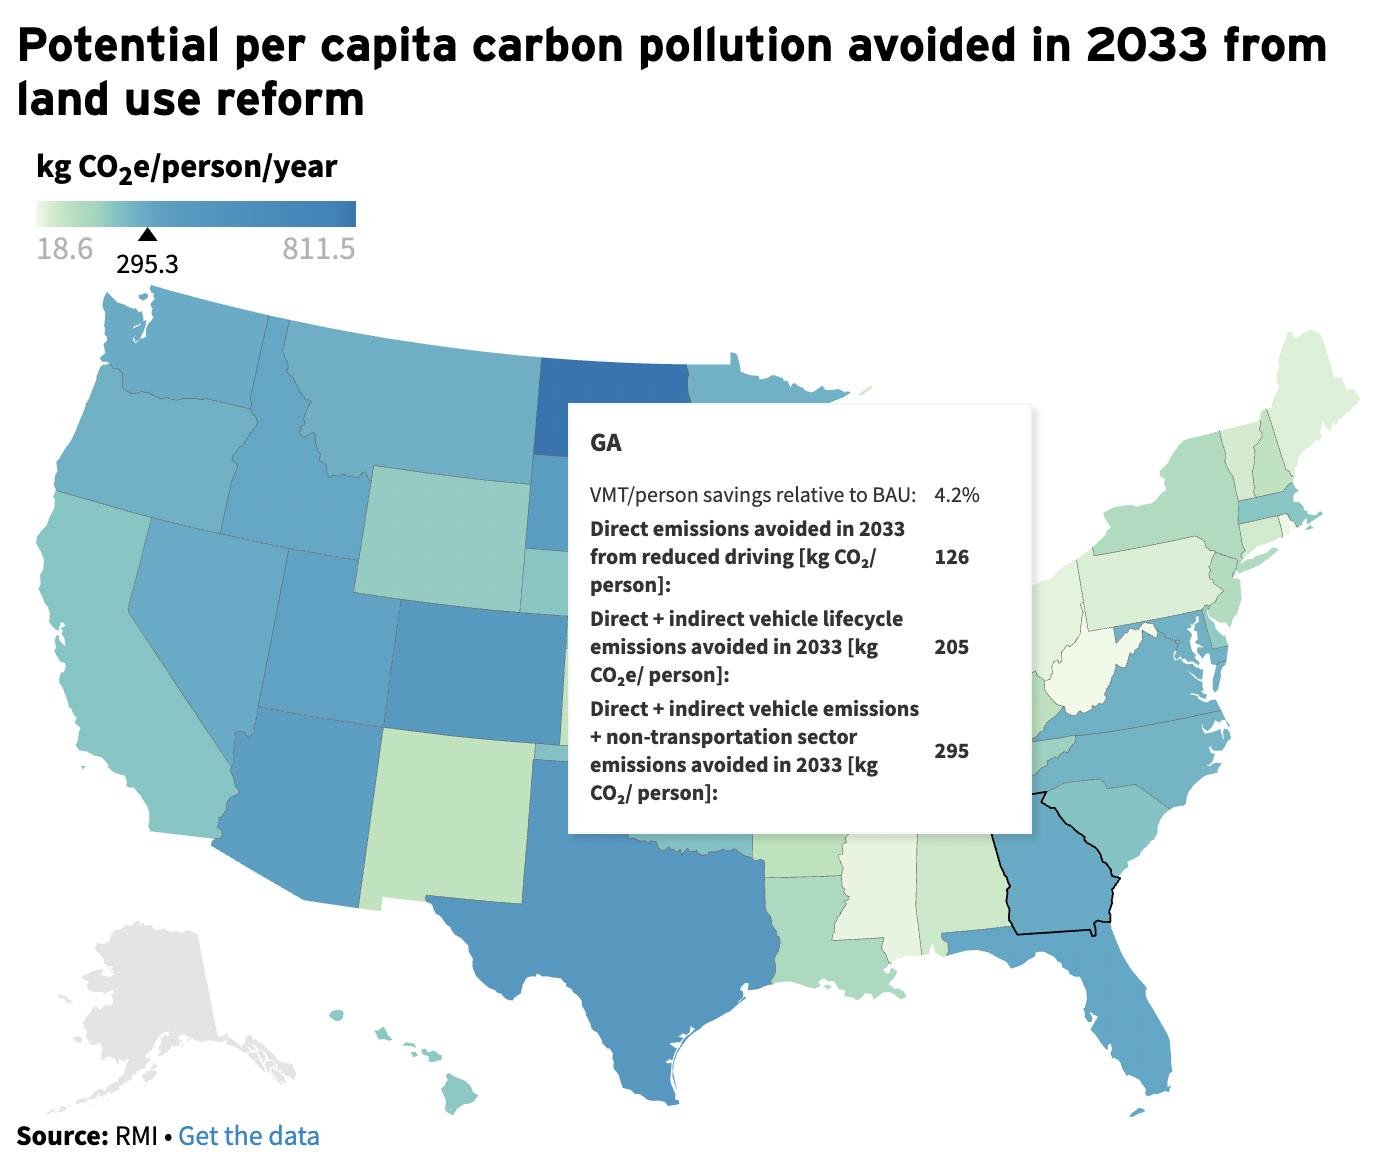 Georgia is particularly well-poised to reduce carbon pollution through better urban planning (&quot;better&quot; meaning: less car dependent &amp; more walkable), potentially eliminating 295 kg of CO2 per capita, annually, through land-use reform. Th